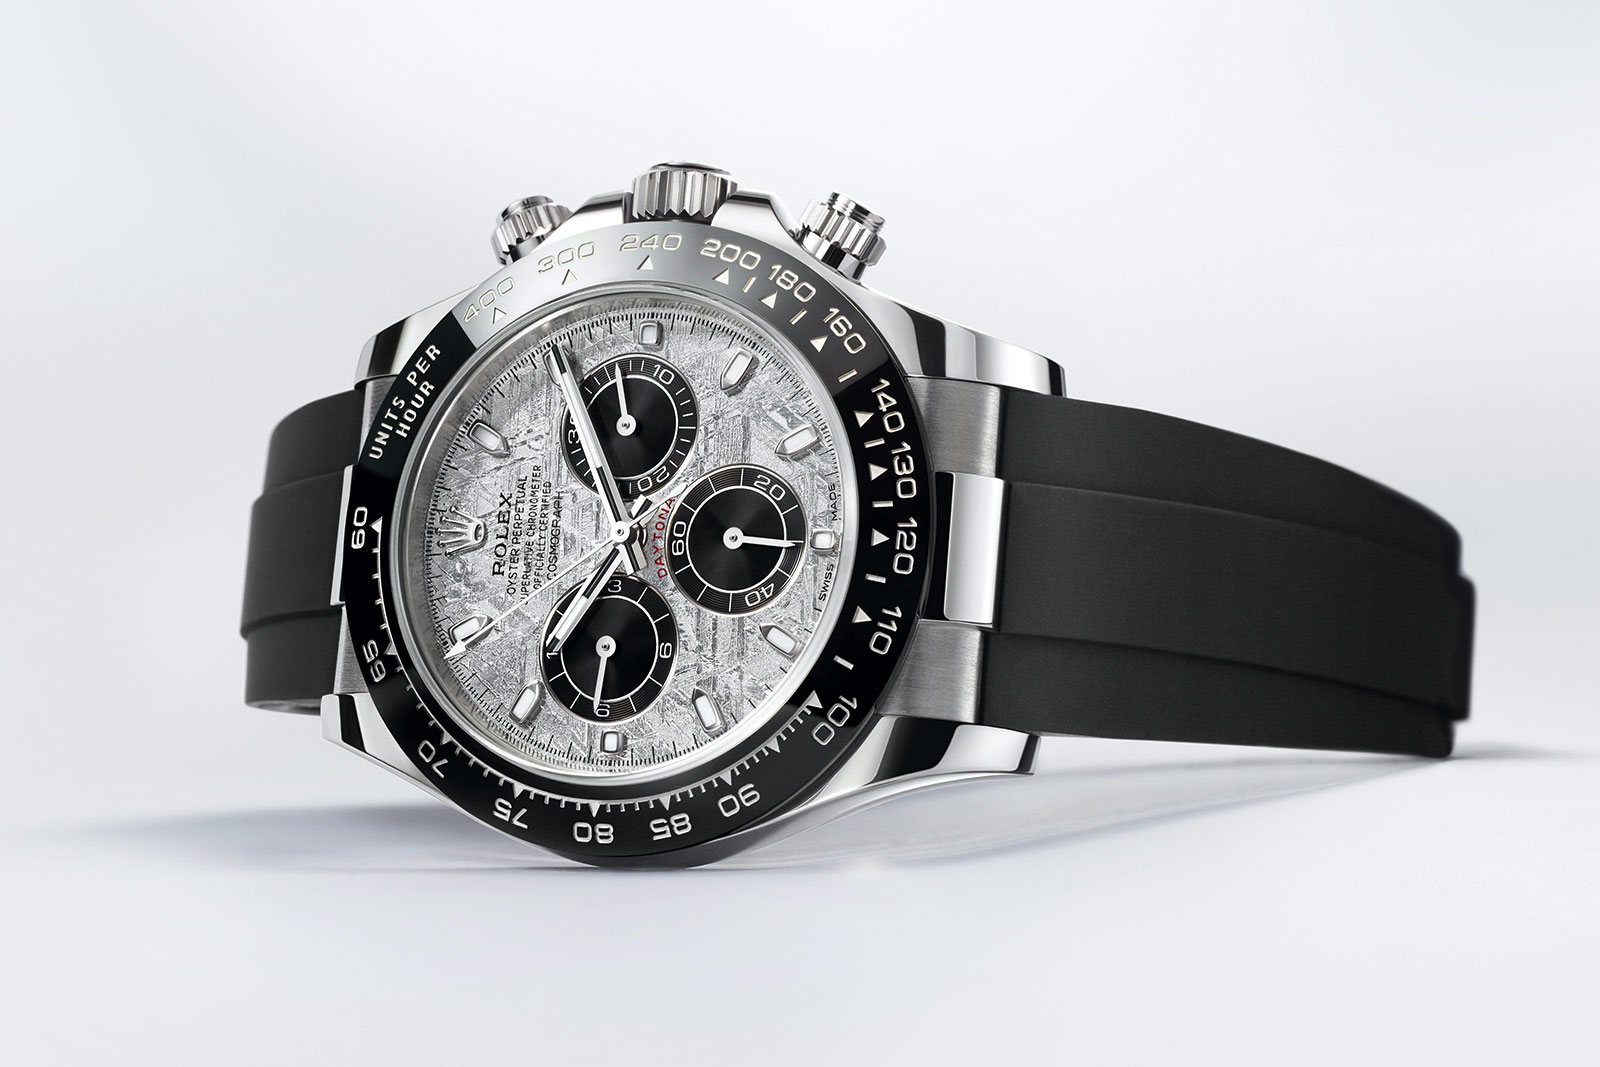 Why the Rolex Cosmograph Daytona Watches are Worth the Investment